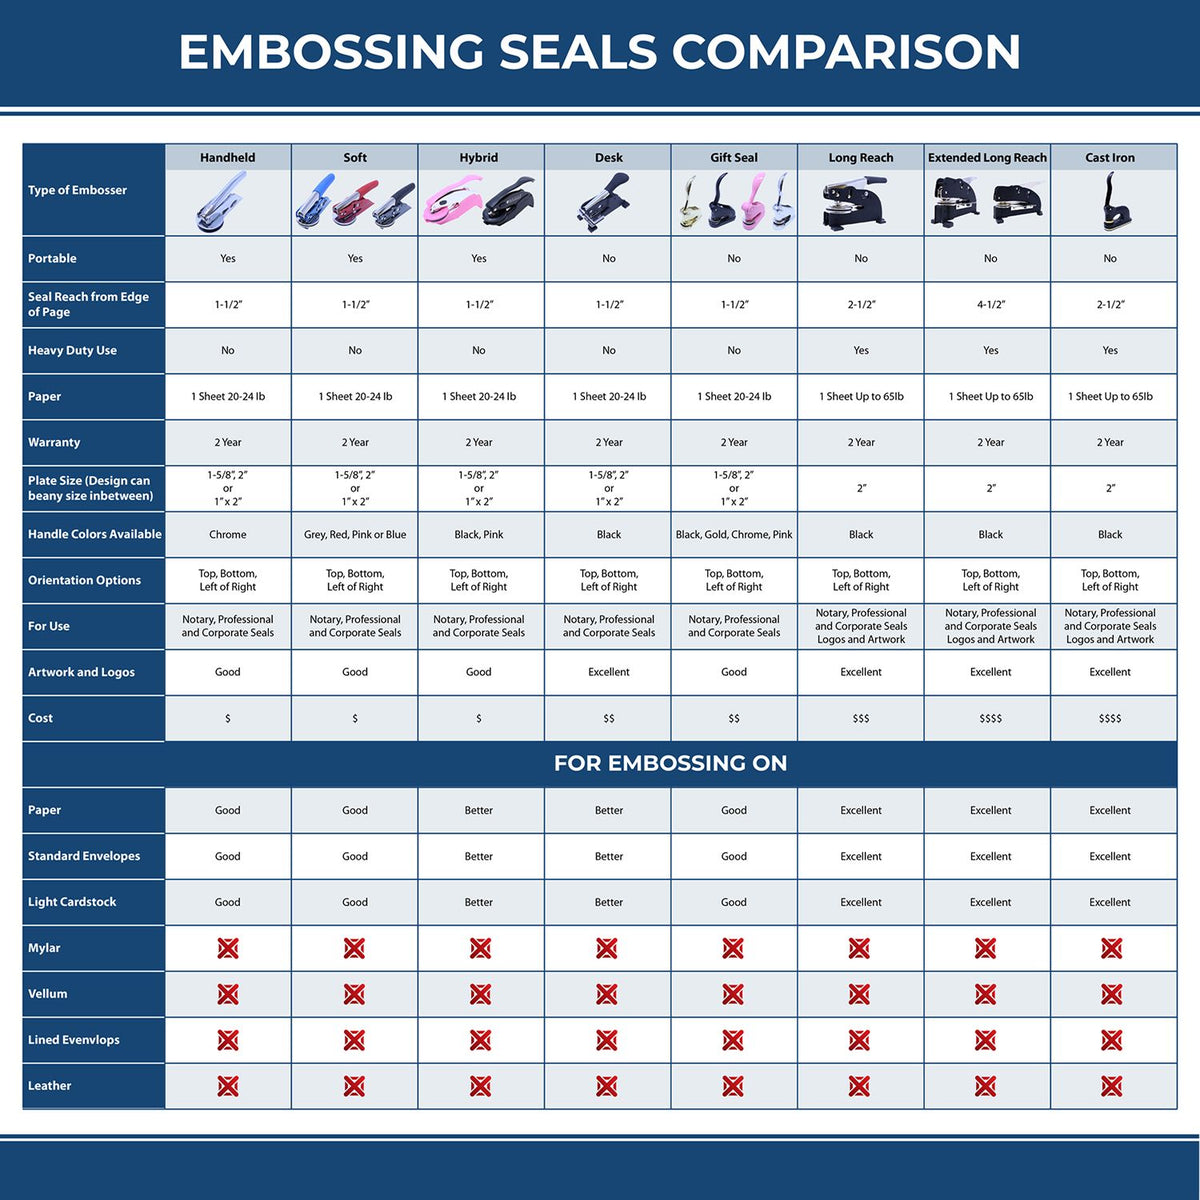 A comparison chart for the different types of mount models available for the Extended Long Reach Missouri Architect Seal Embosser.